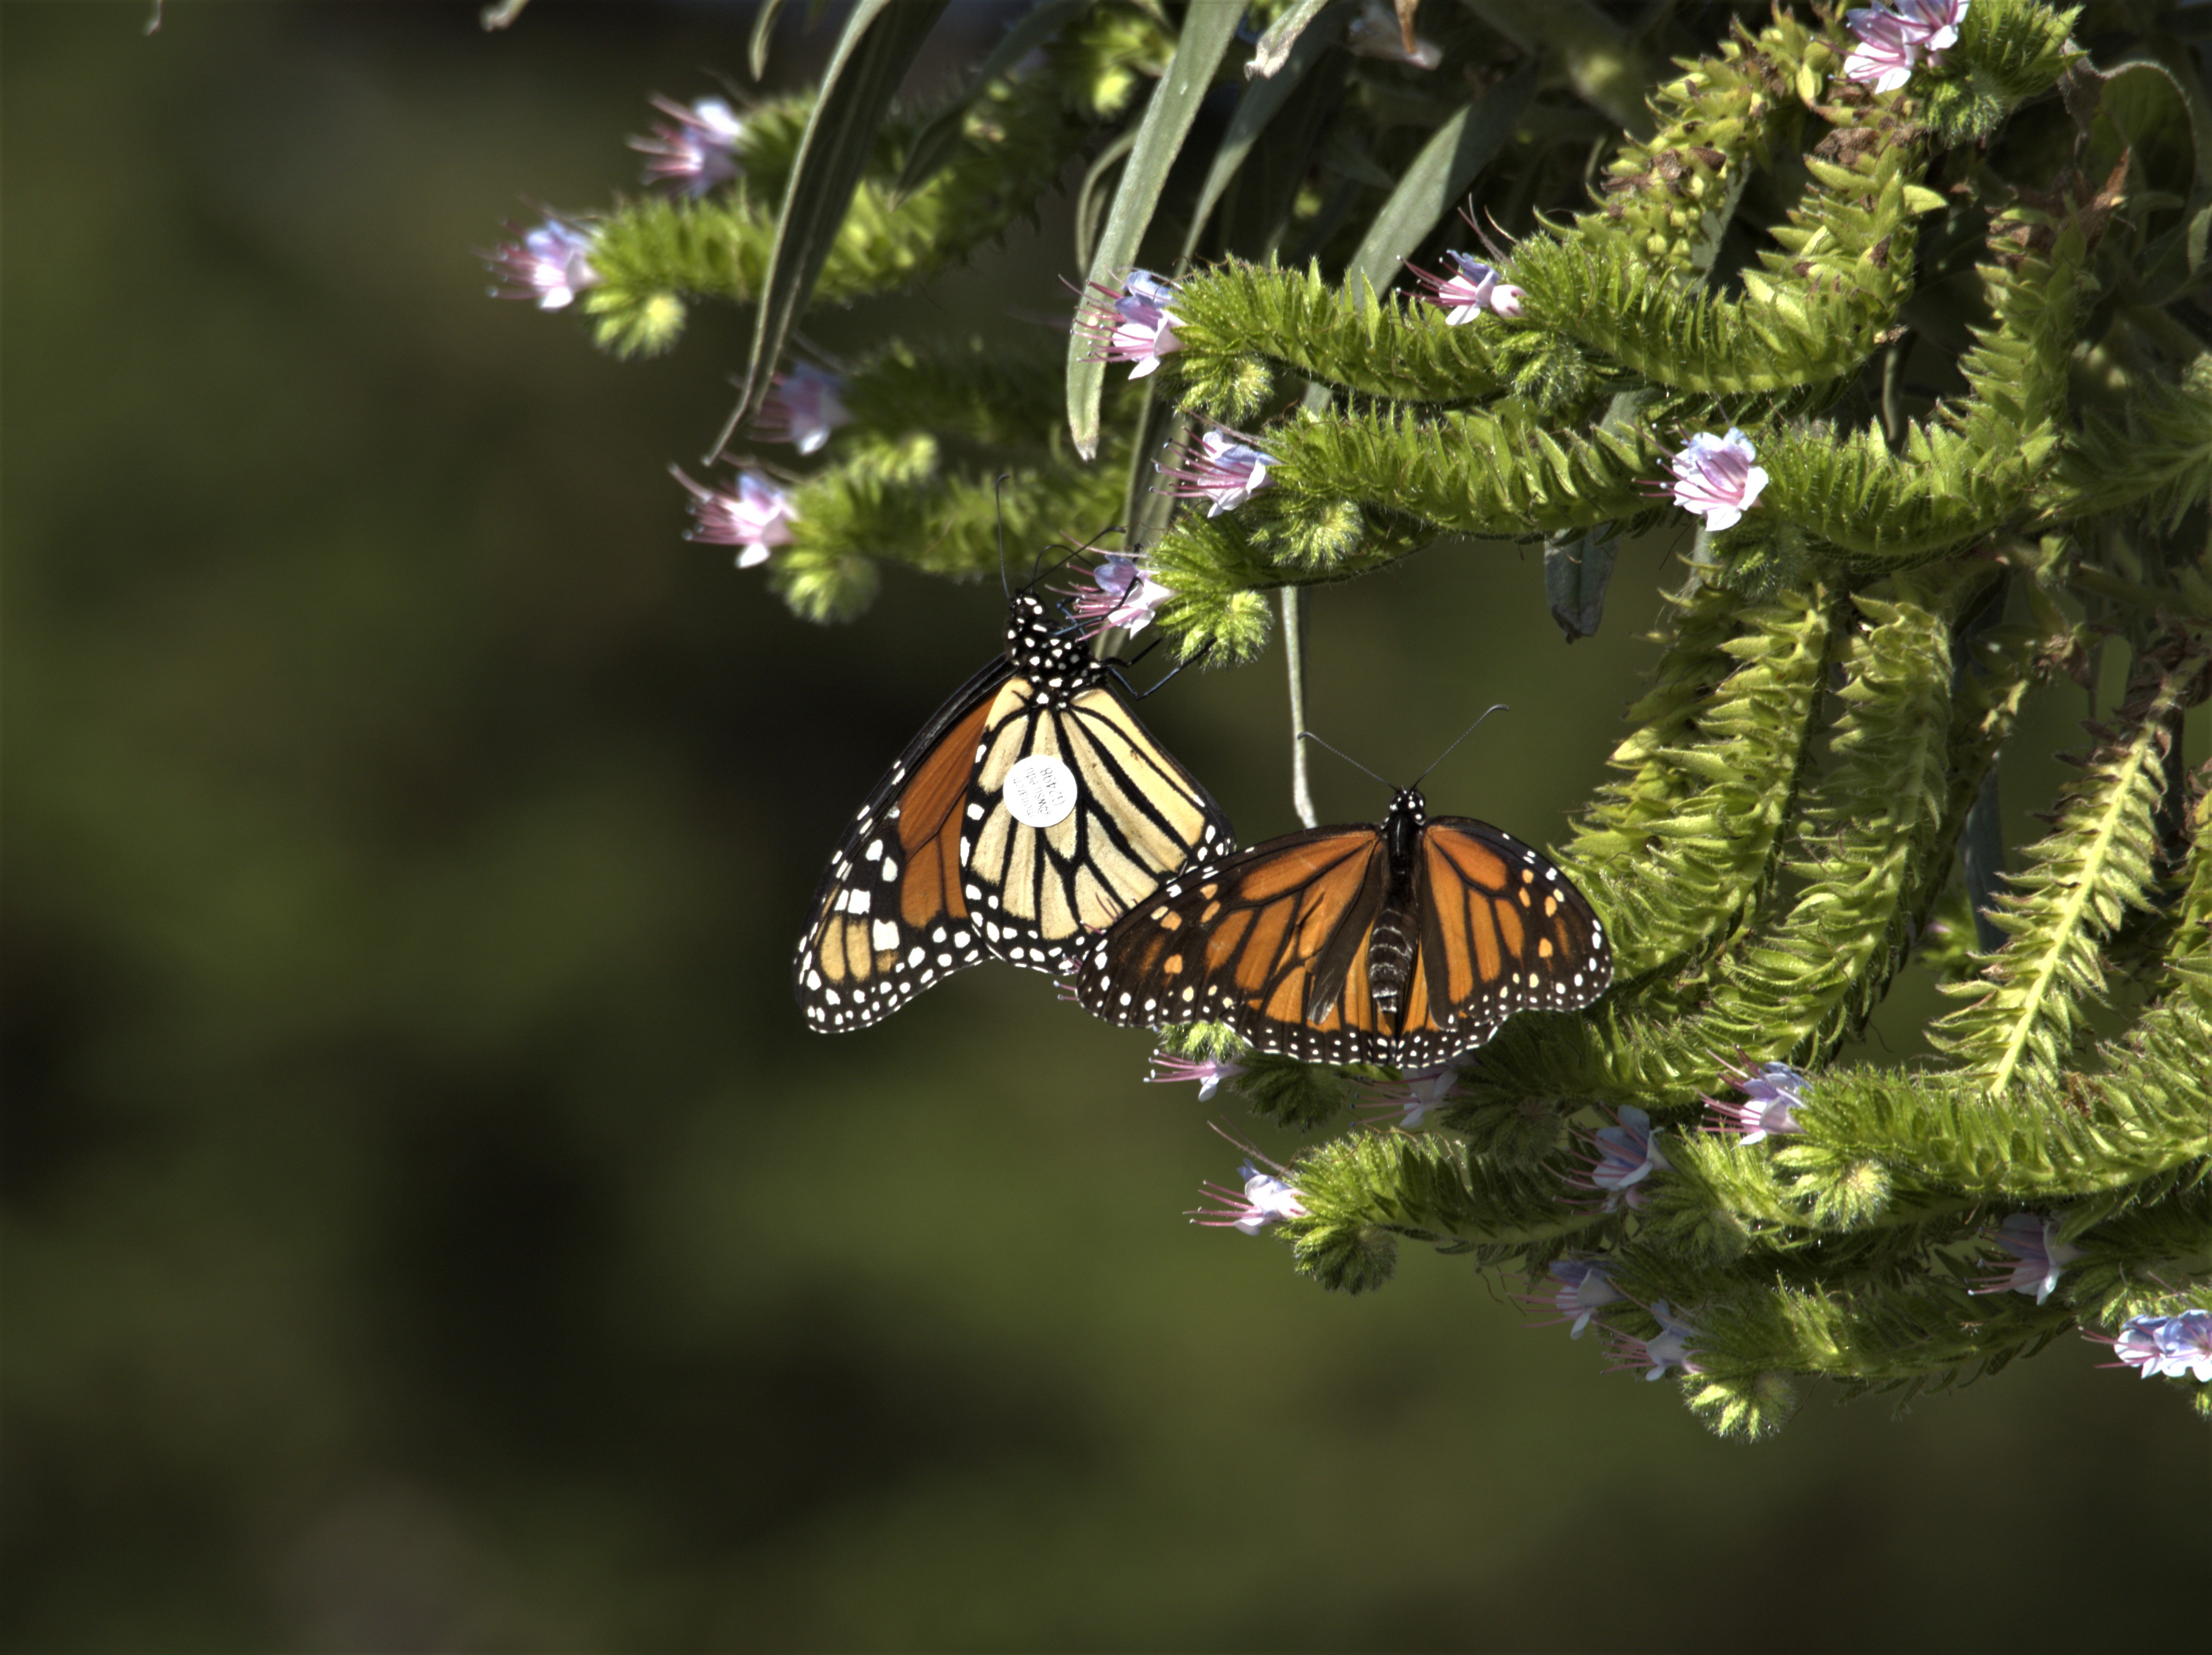 Two monarchs with small, round, white tags on their wings perch on bright green branches tipped with small, pale purple flowers.